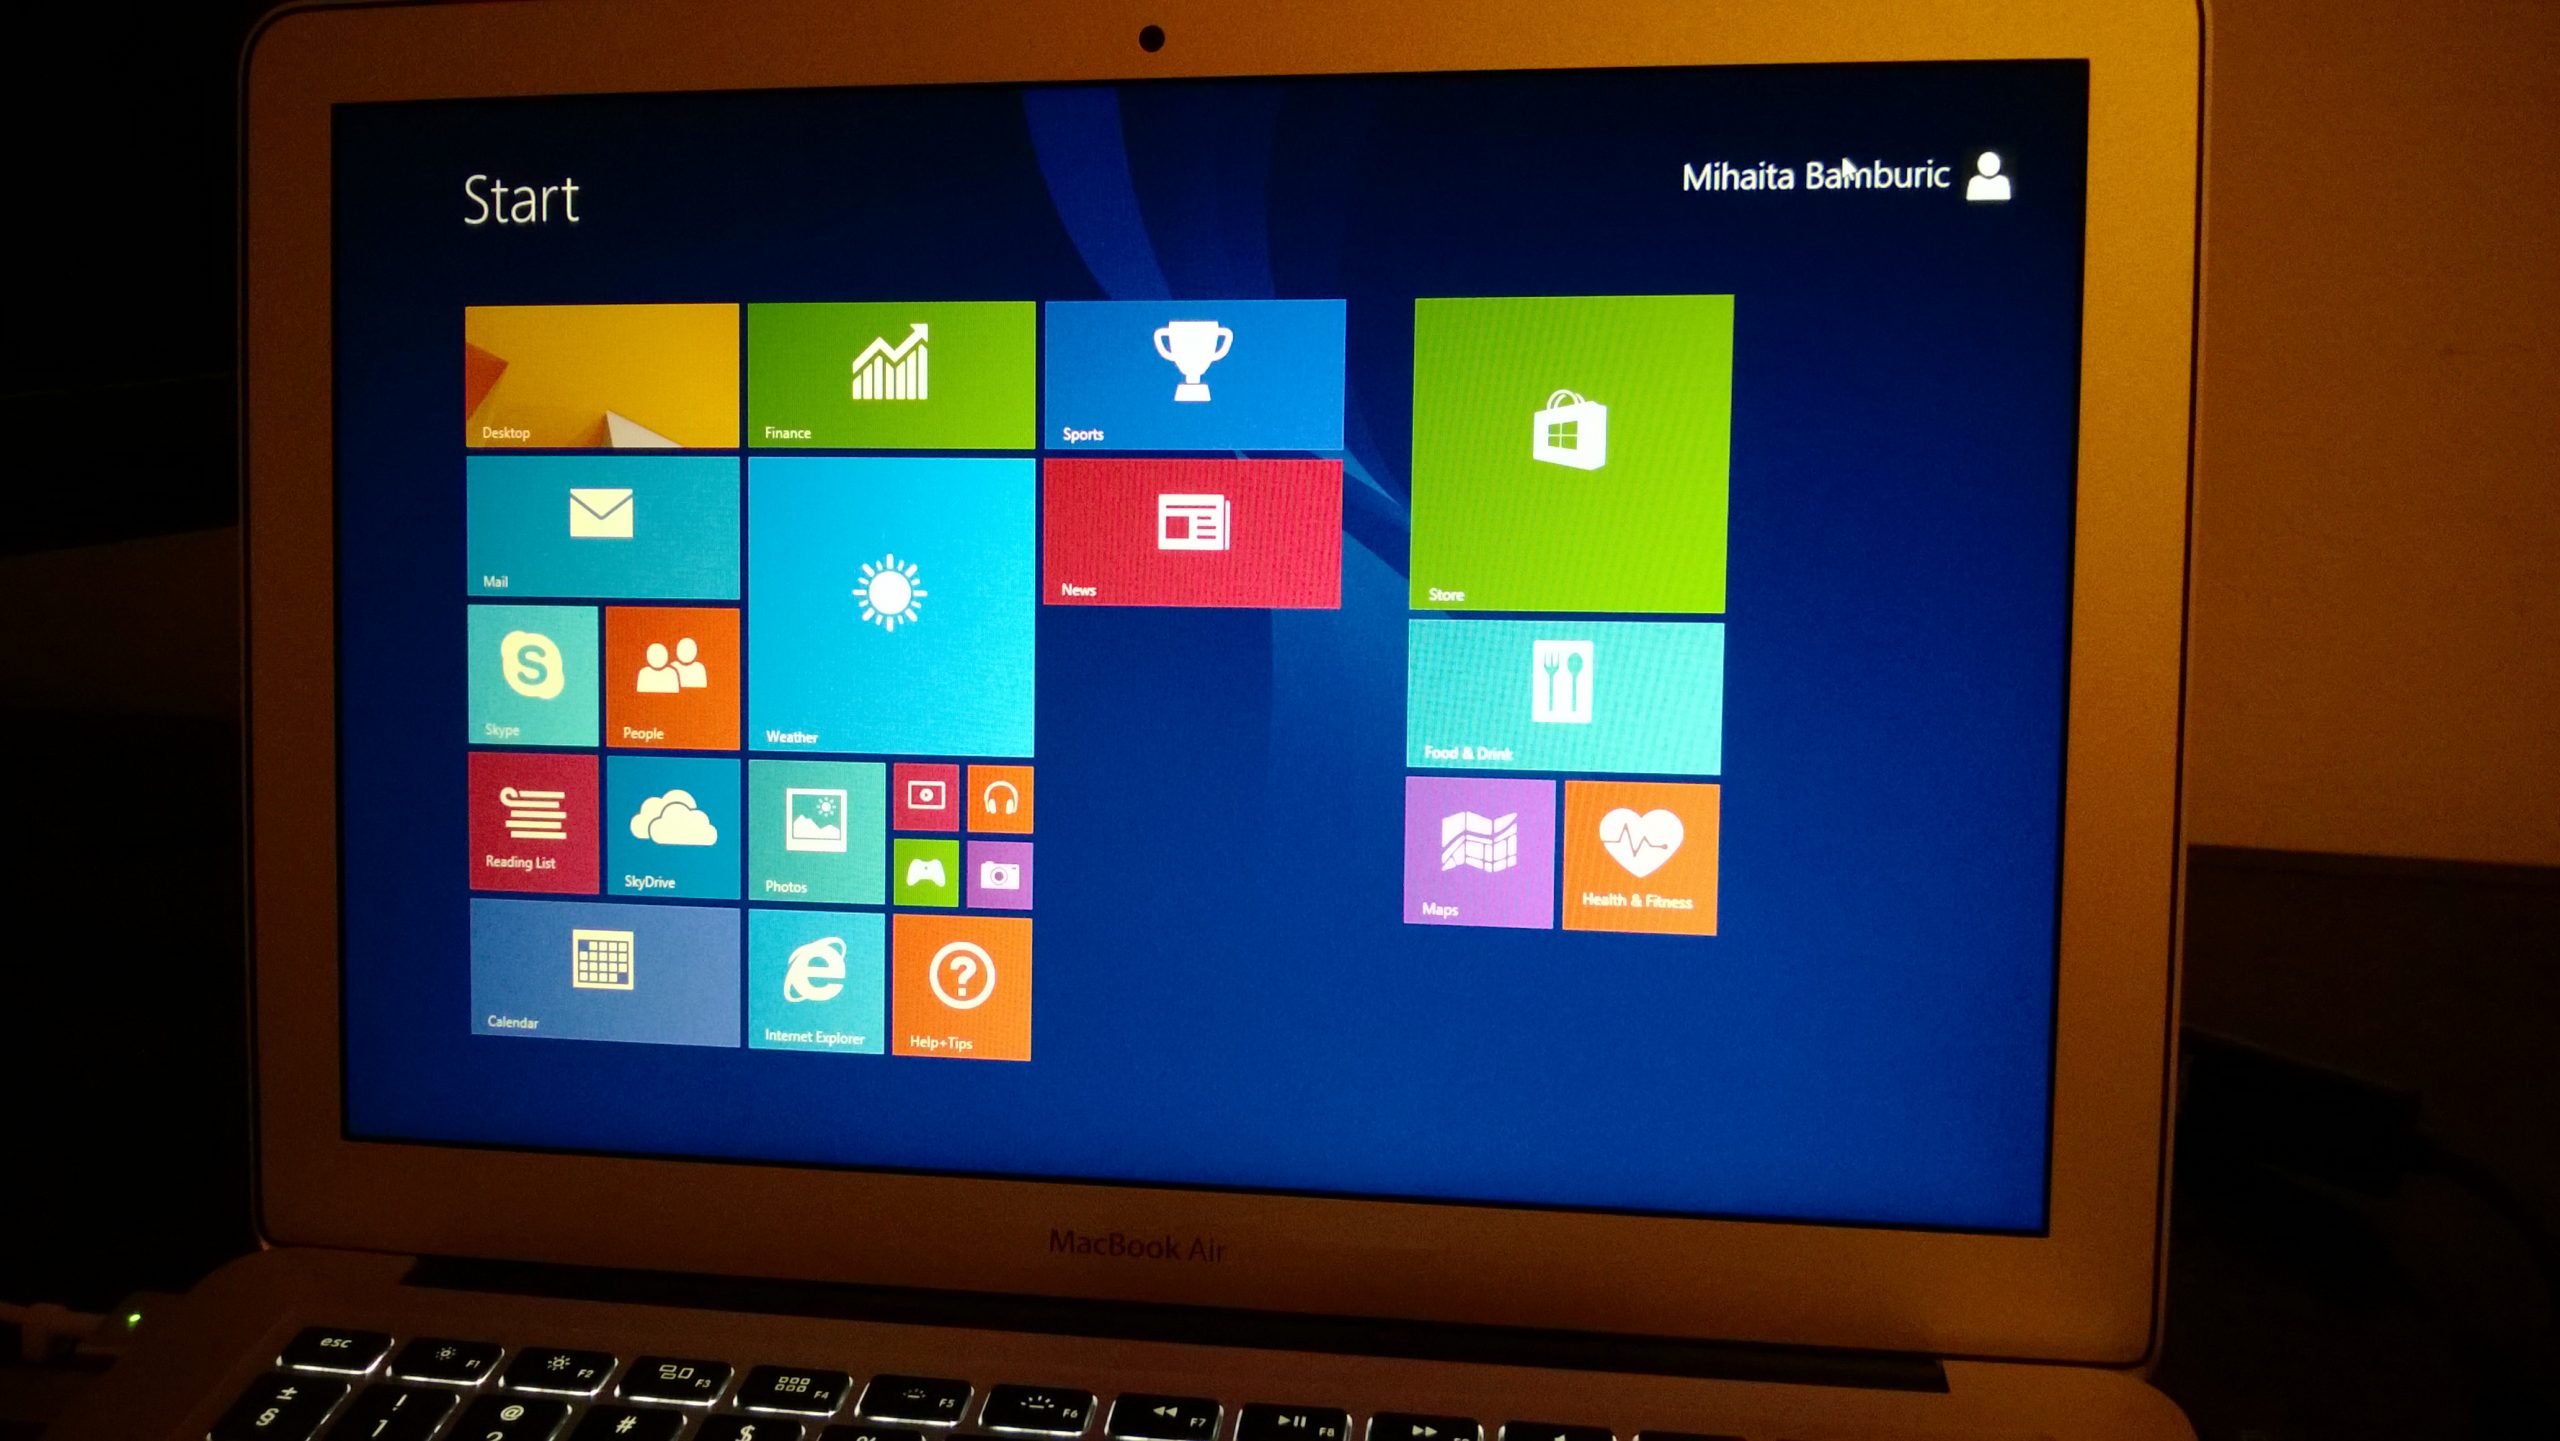 Windows 8.1 on 2013 Apple MacBook Air — doable, but not a great 